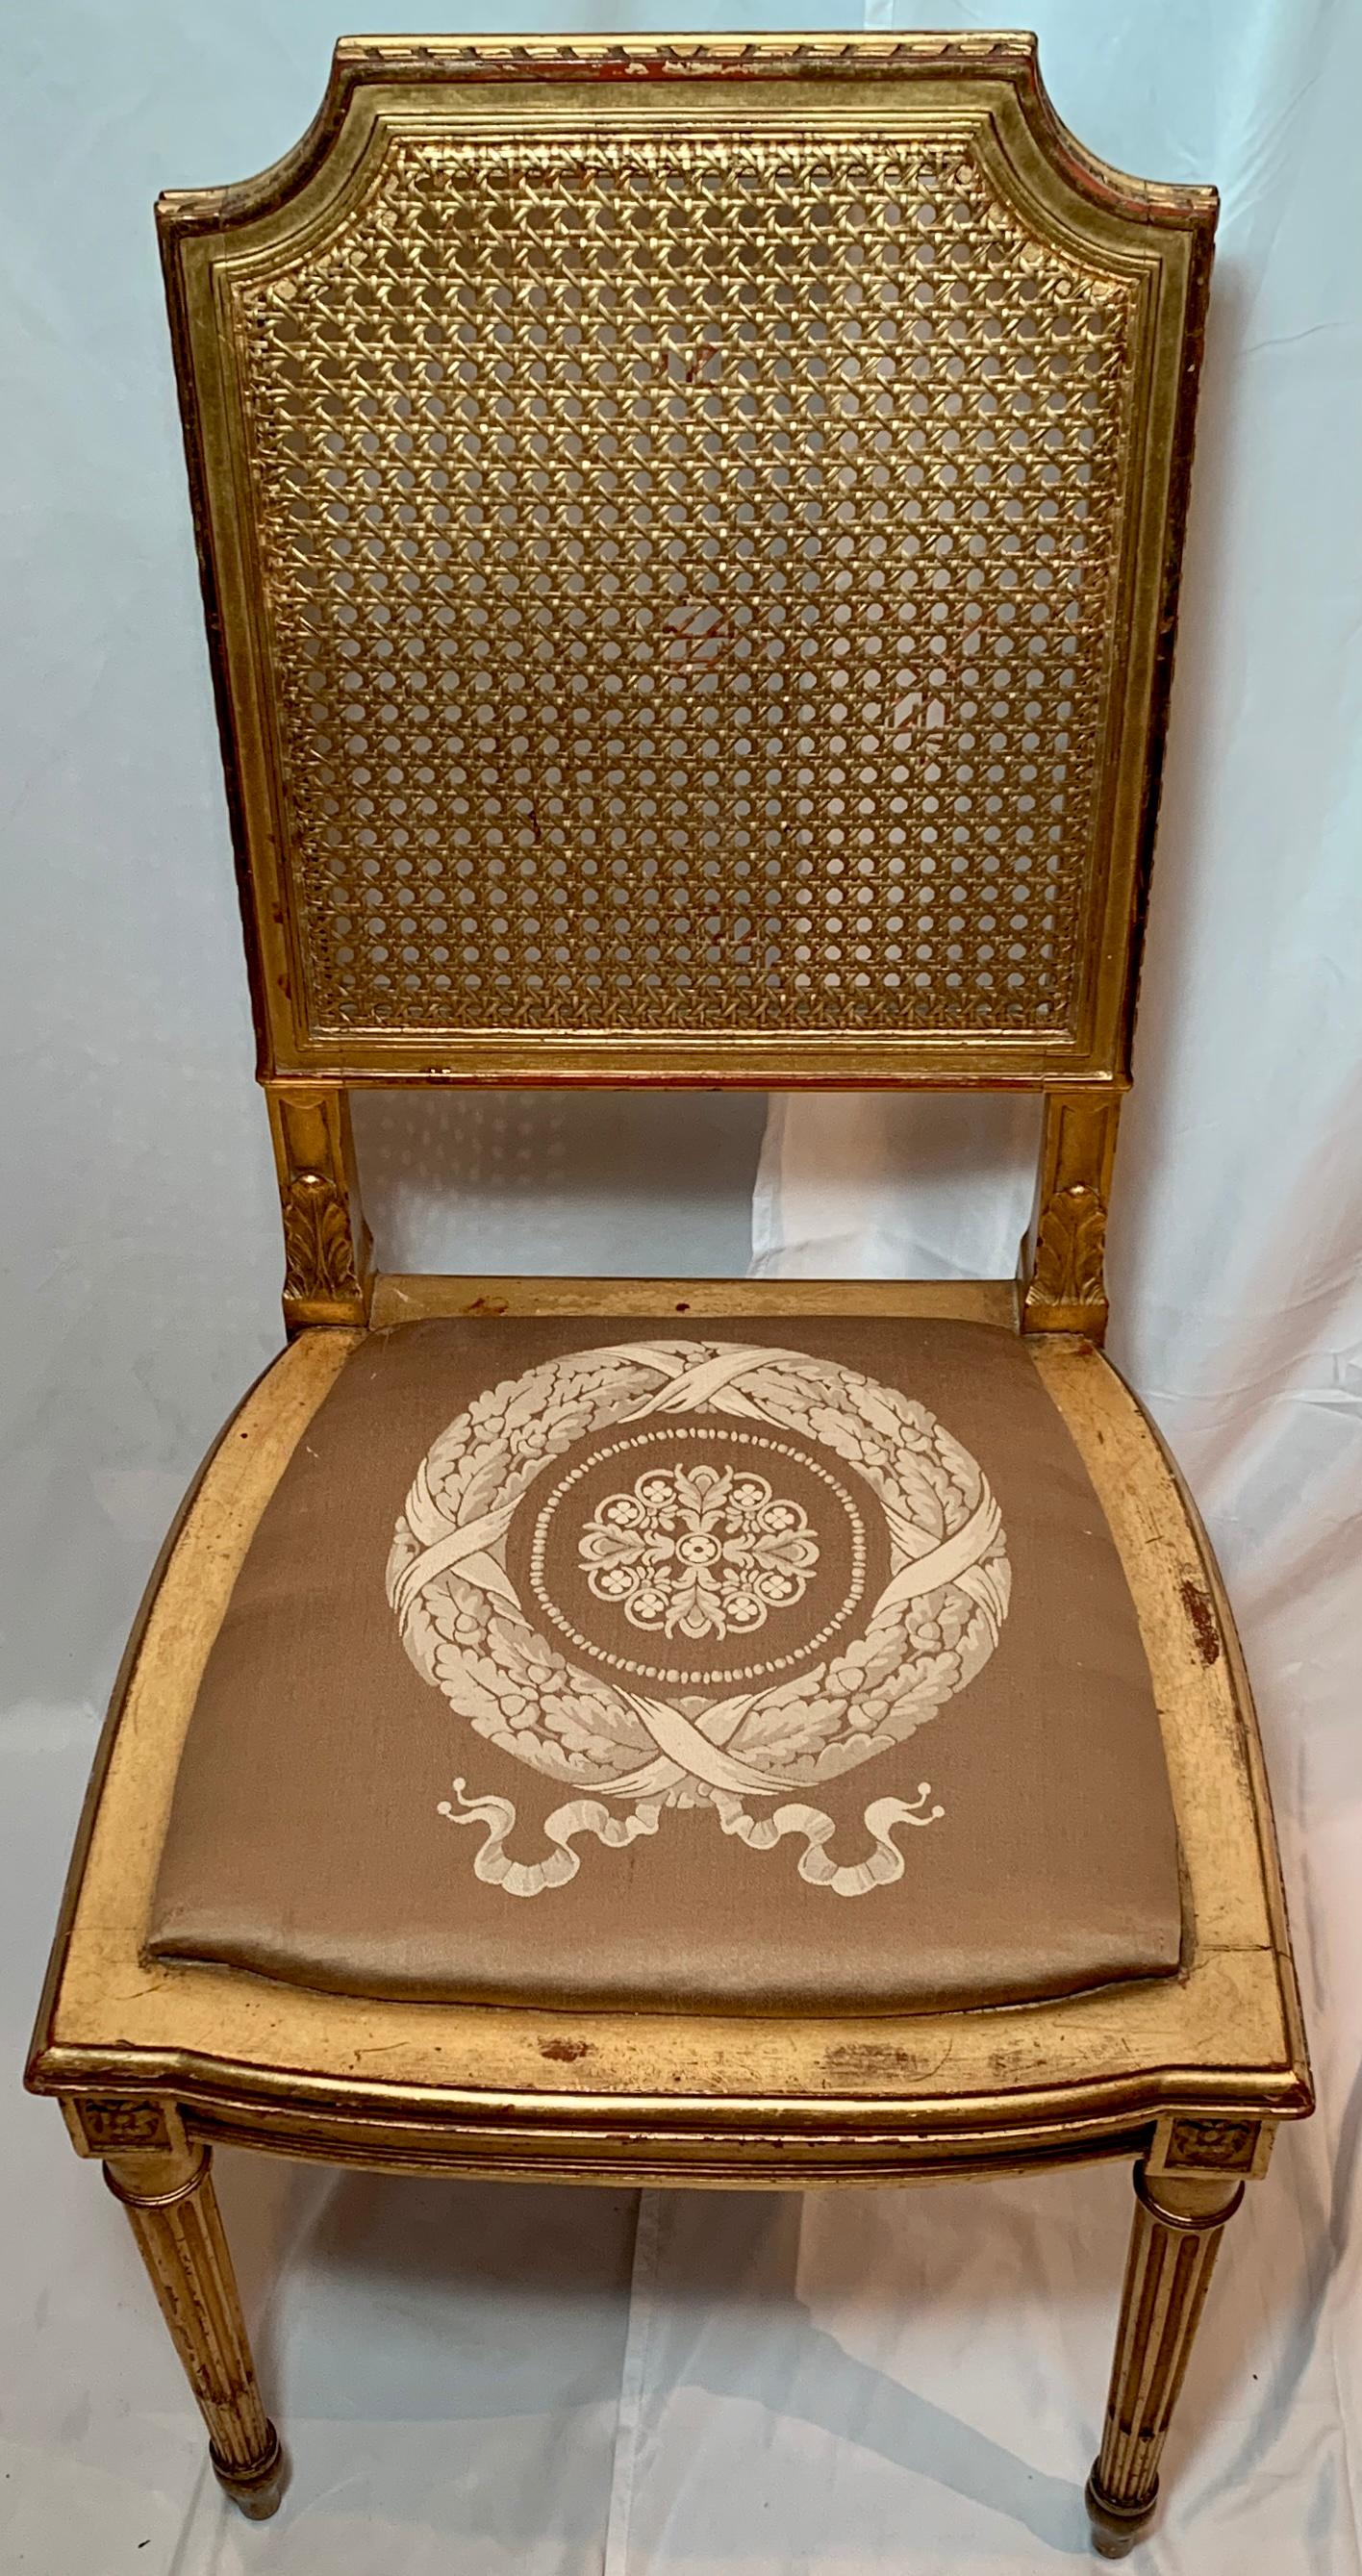 Antique French gold leaf side chair, Circa 1880.
This gold leaf side chair would make a nice addition to any room or vestibule.